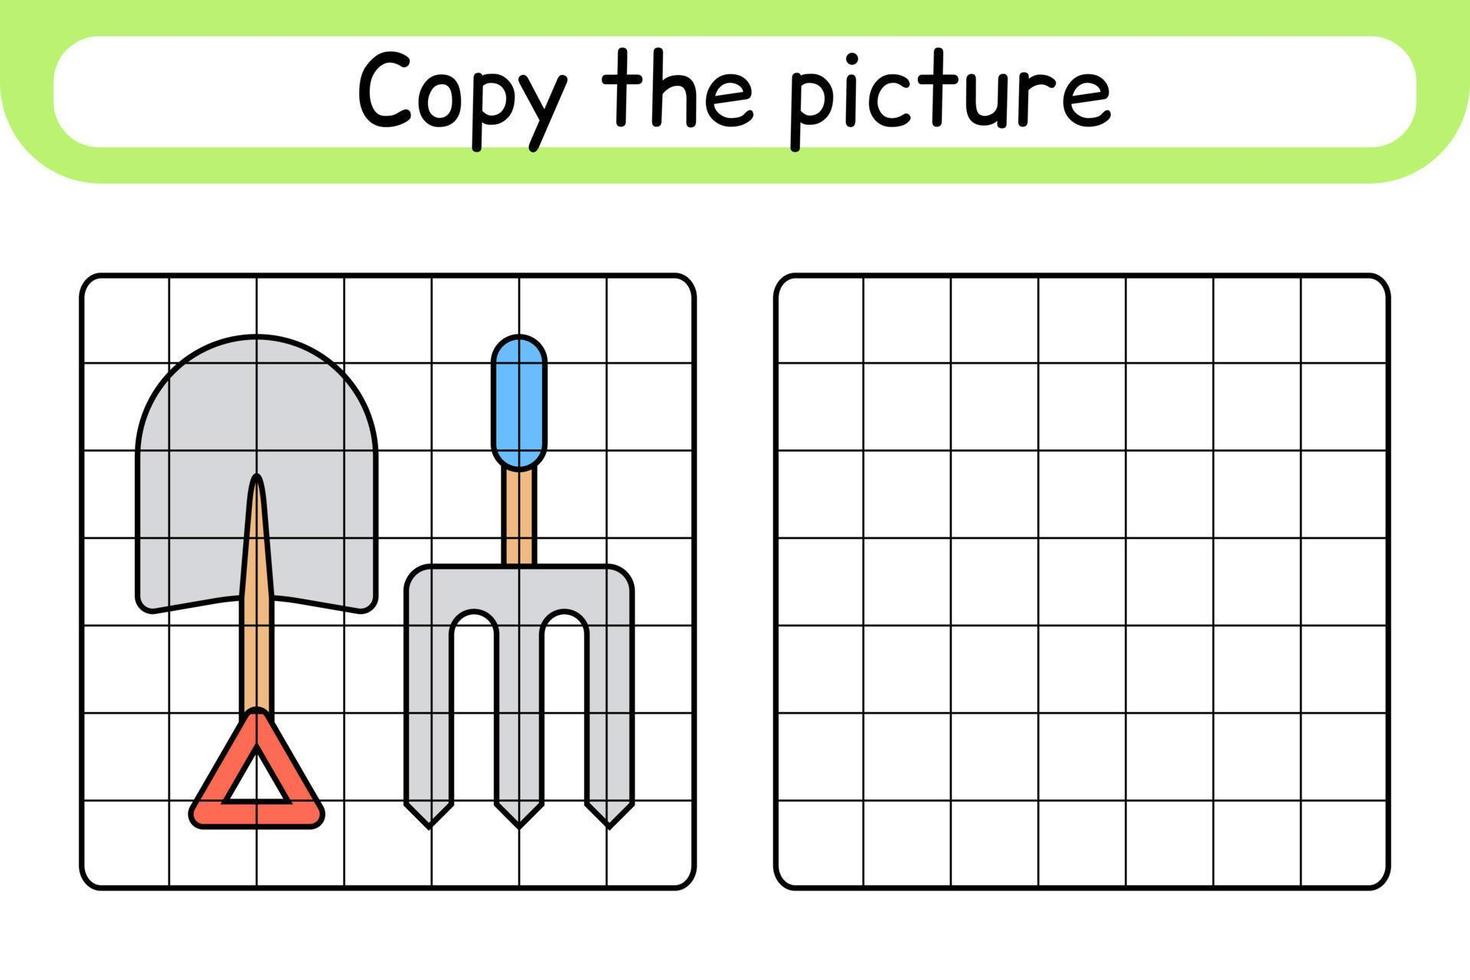 Copy the picture and color pitchfork and shovel. Complete the picture. Finish the image. Coloring book. Educational drawing exercise game for children vector